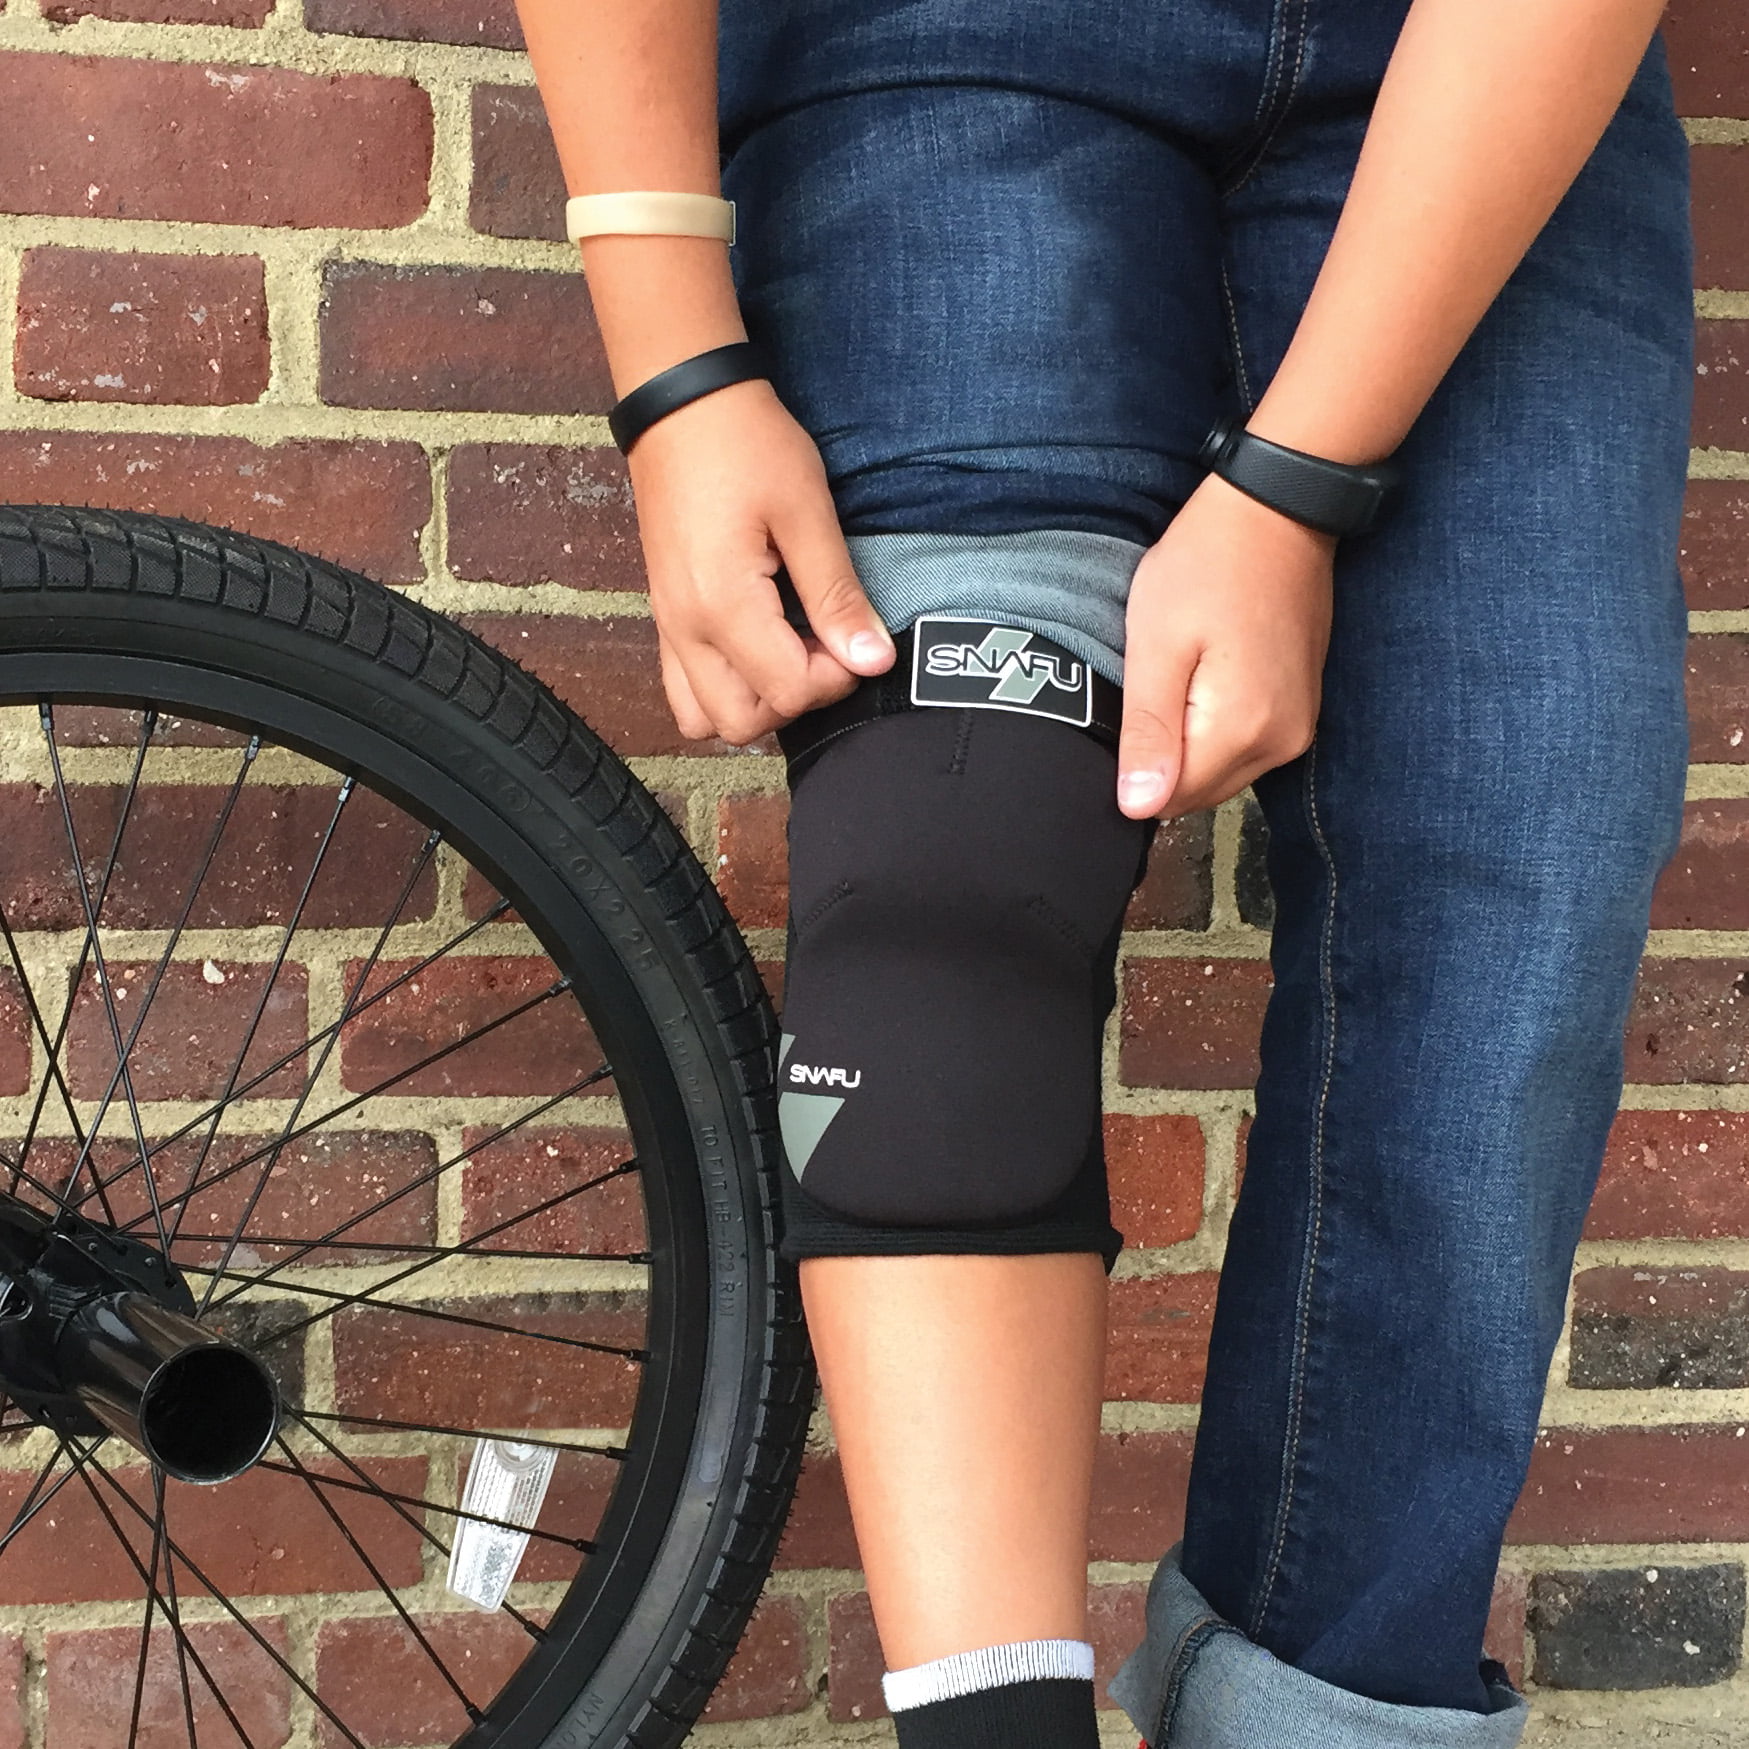 Snafu Multisport Knee and Elbow Pads 